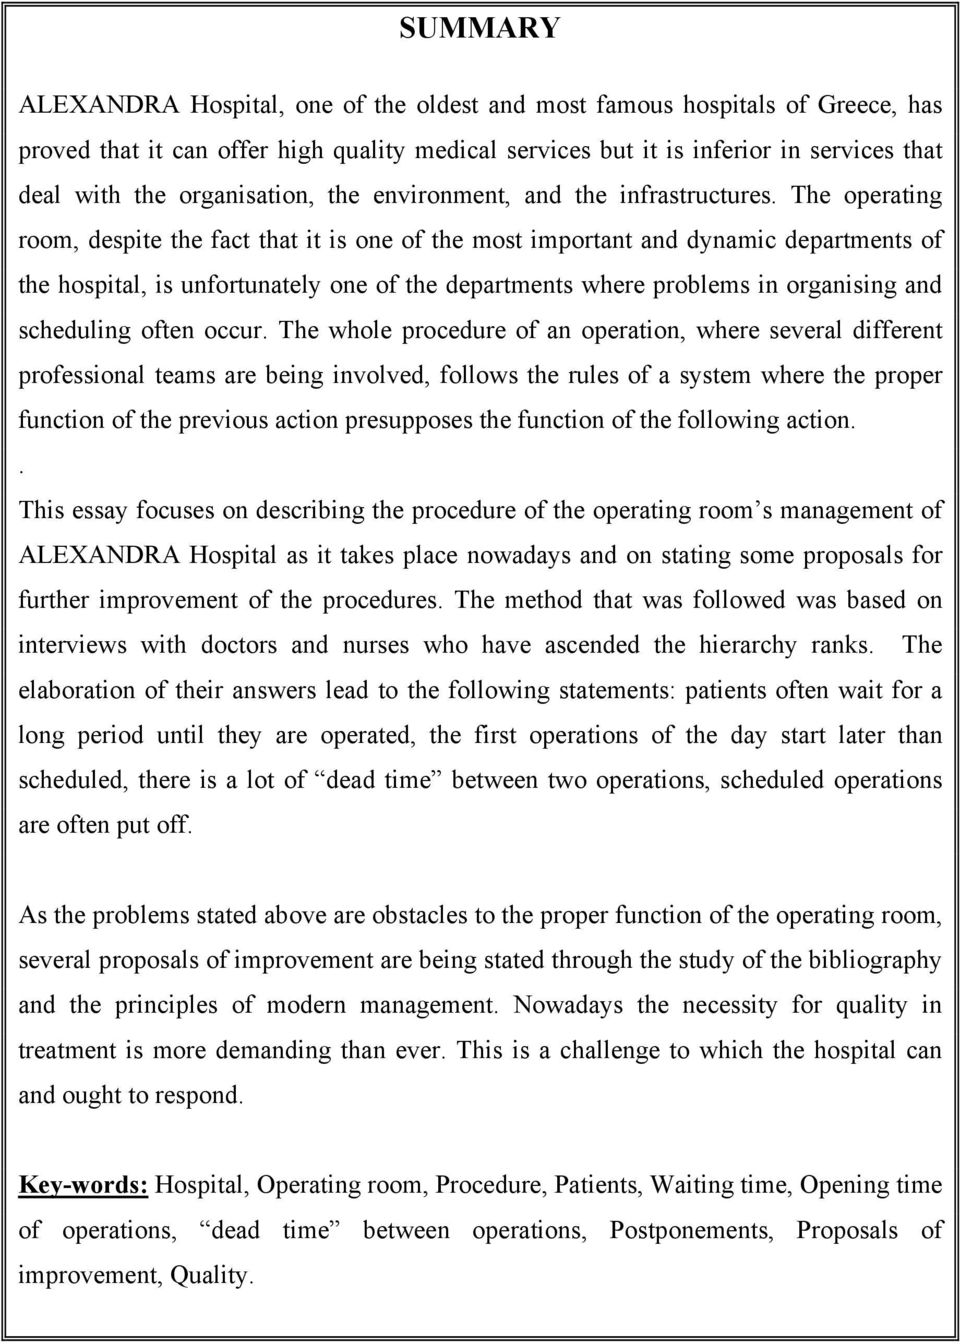 The operating room, despite the fact that it is one of the most important and dynamic departments of the hospital, is unfortunately one of the departments where problems in organising and scheduling